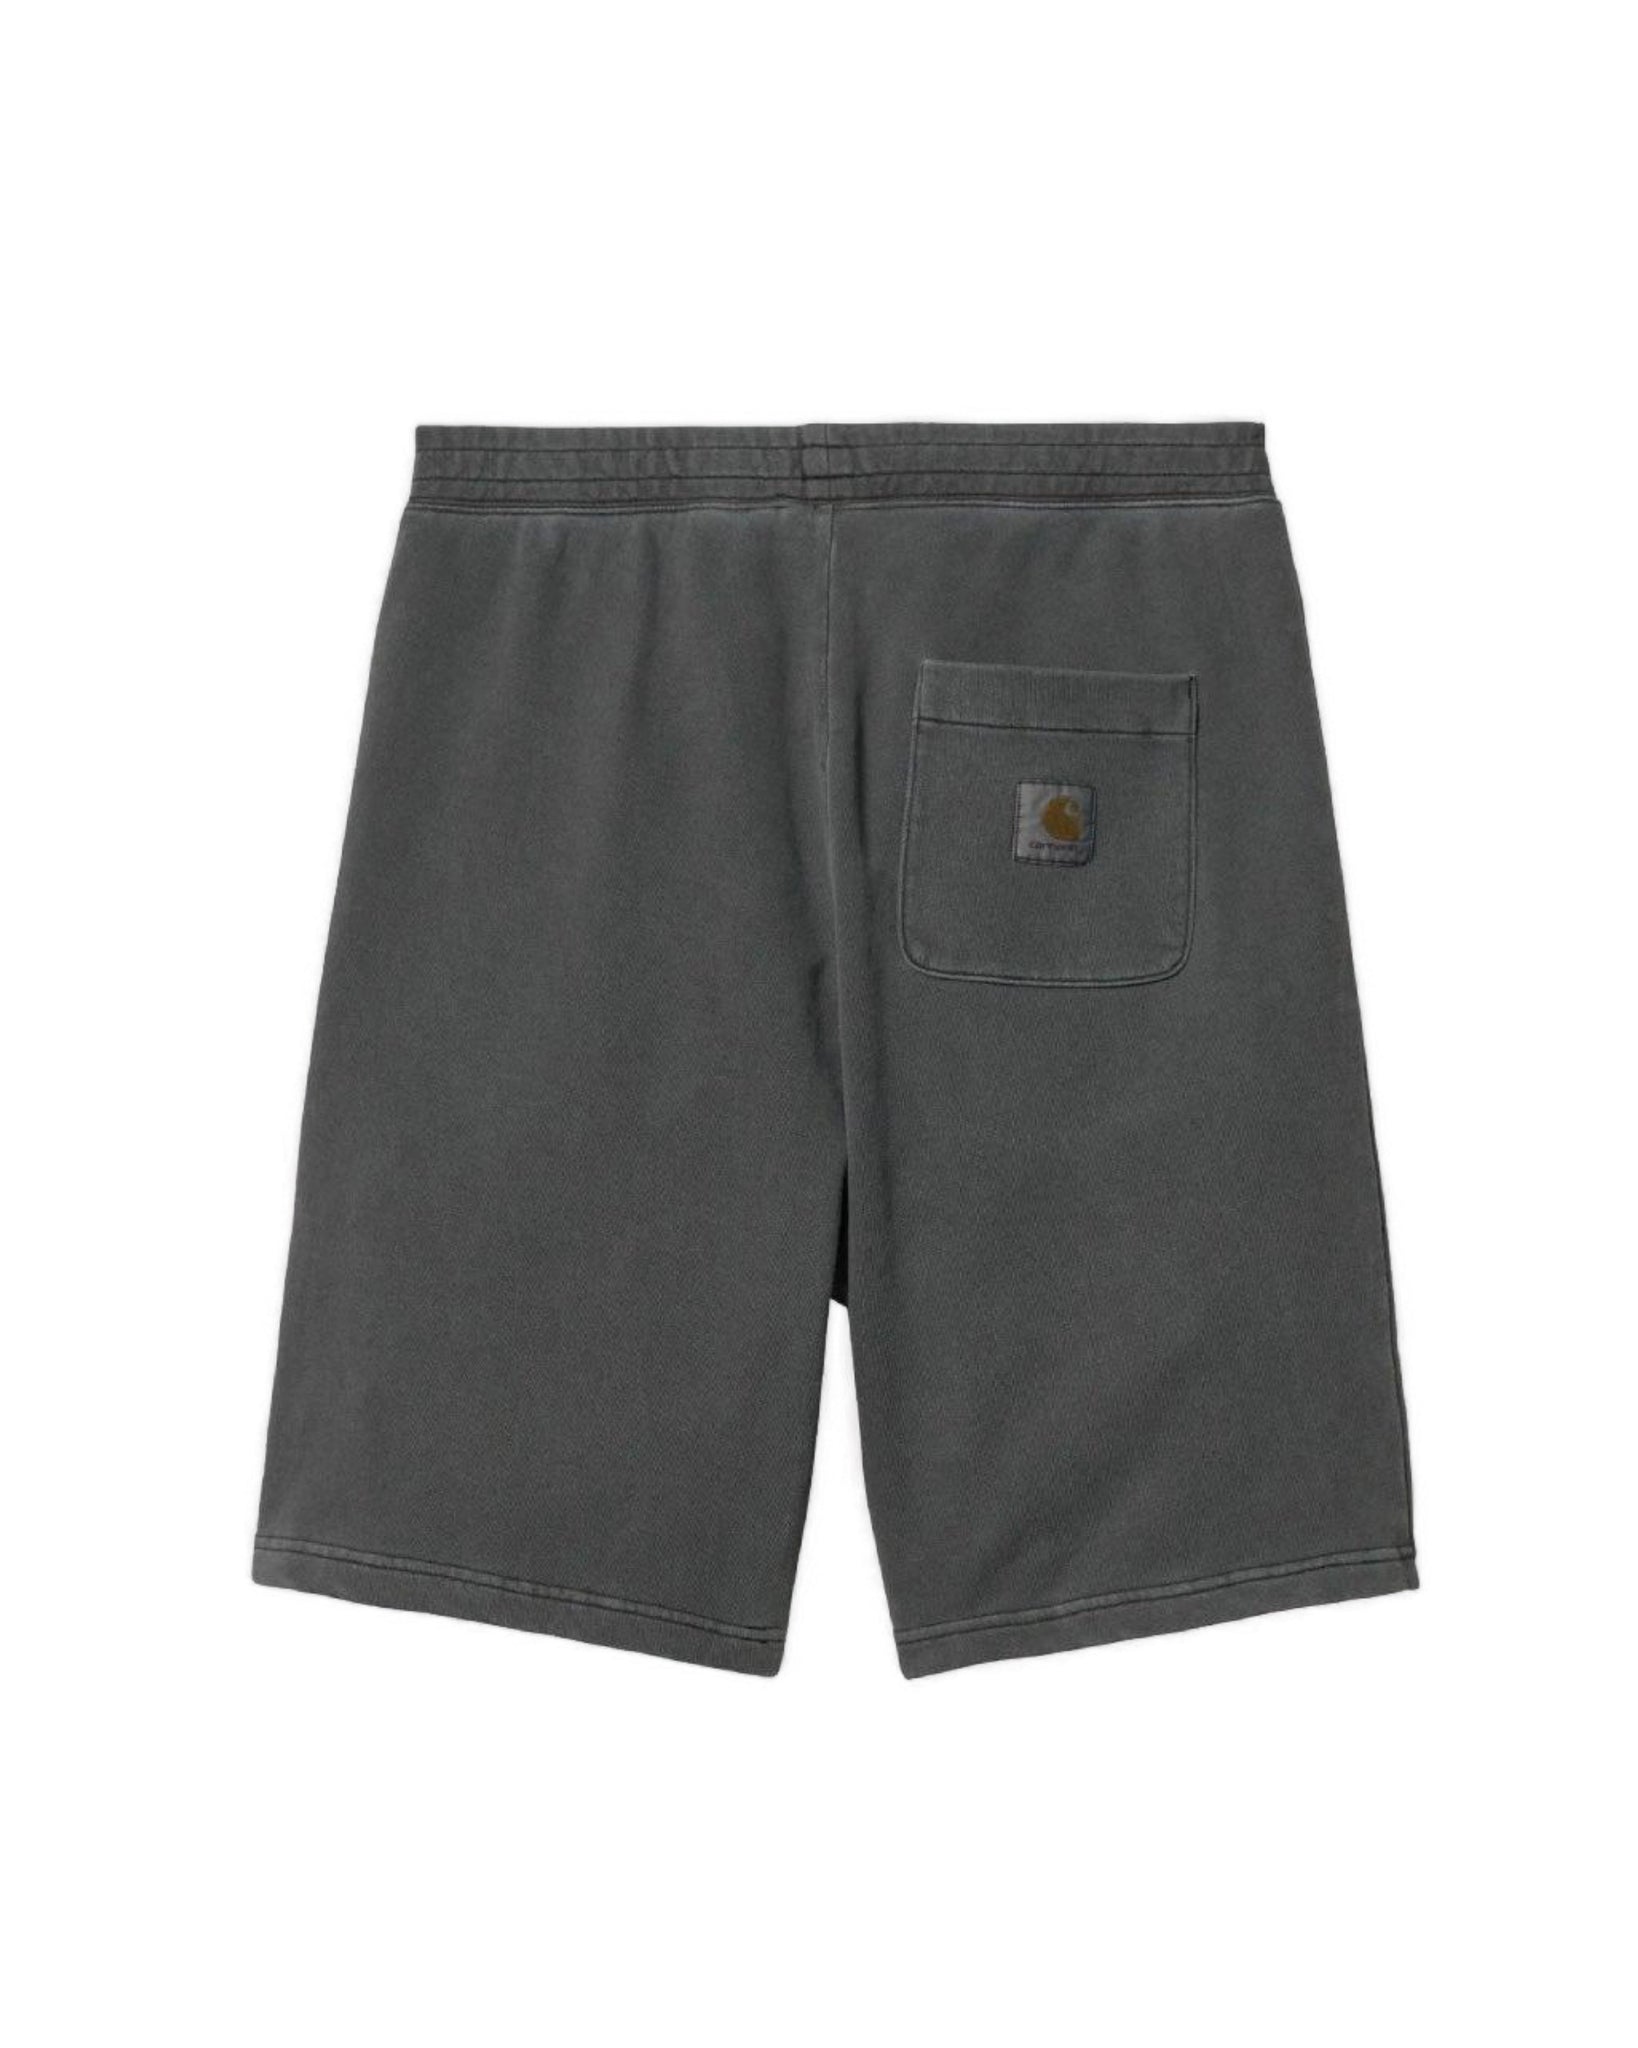 Short Nelson Sweat - Charcoal (garment dyed)